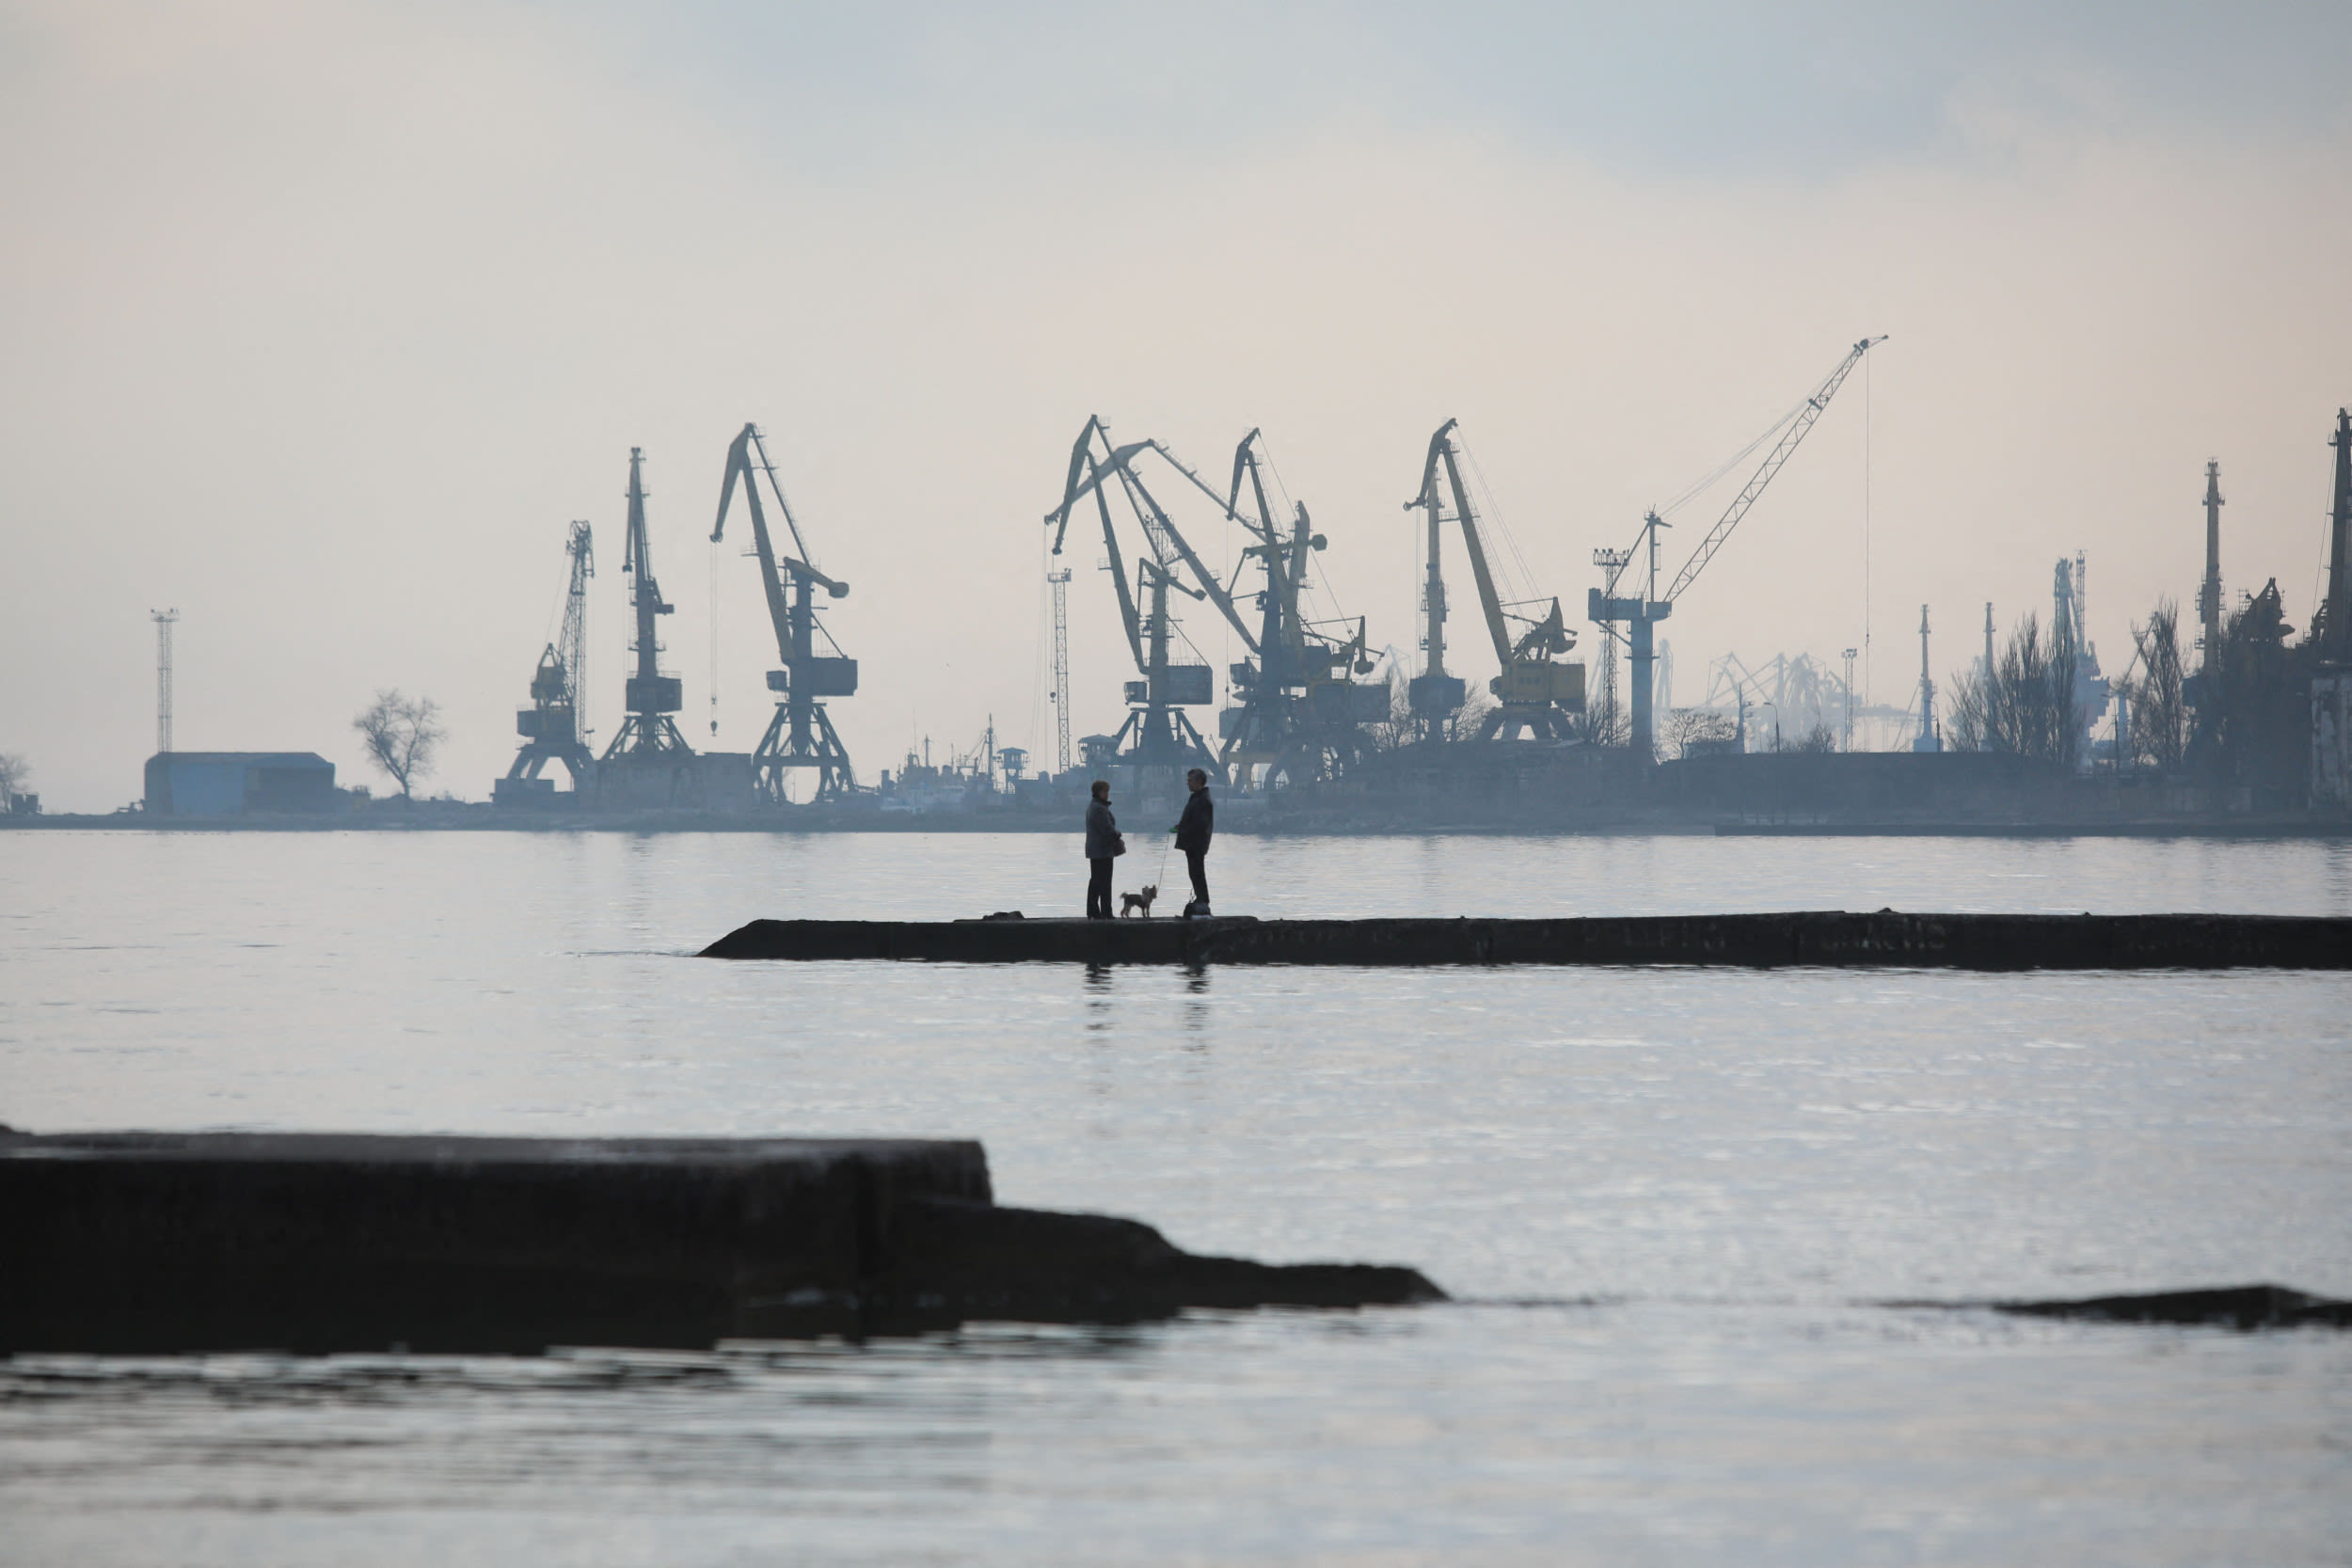 Russia pulls all warships from Sea of Azov: Ukraine